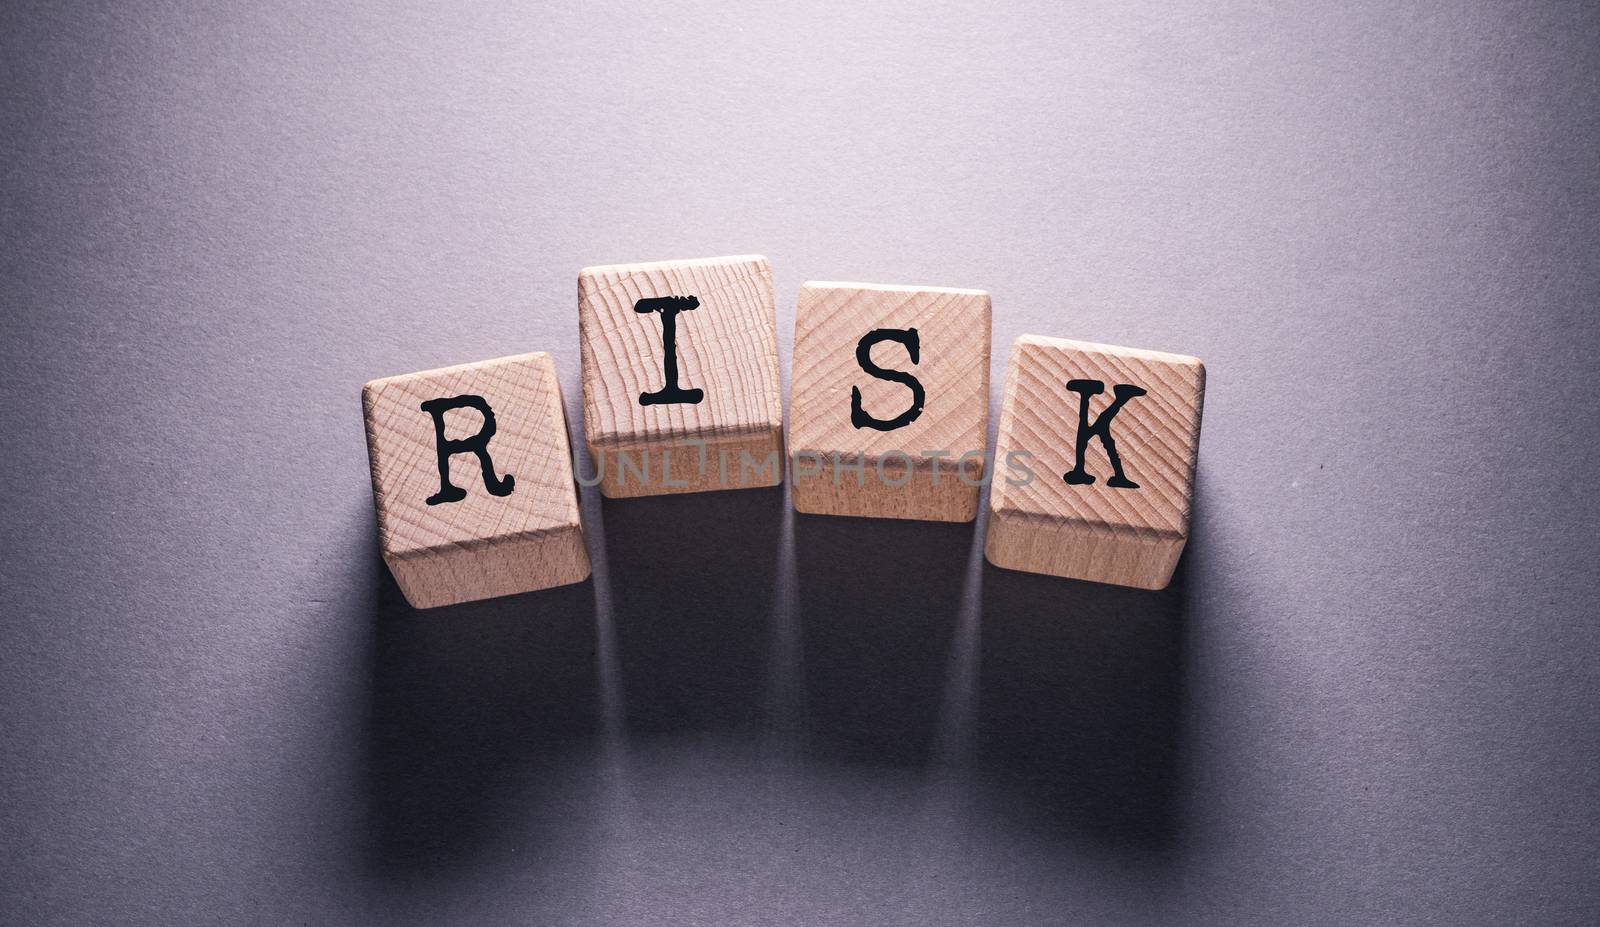 Risk Word with Wooden Cubes by Jievani